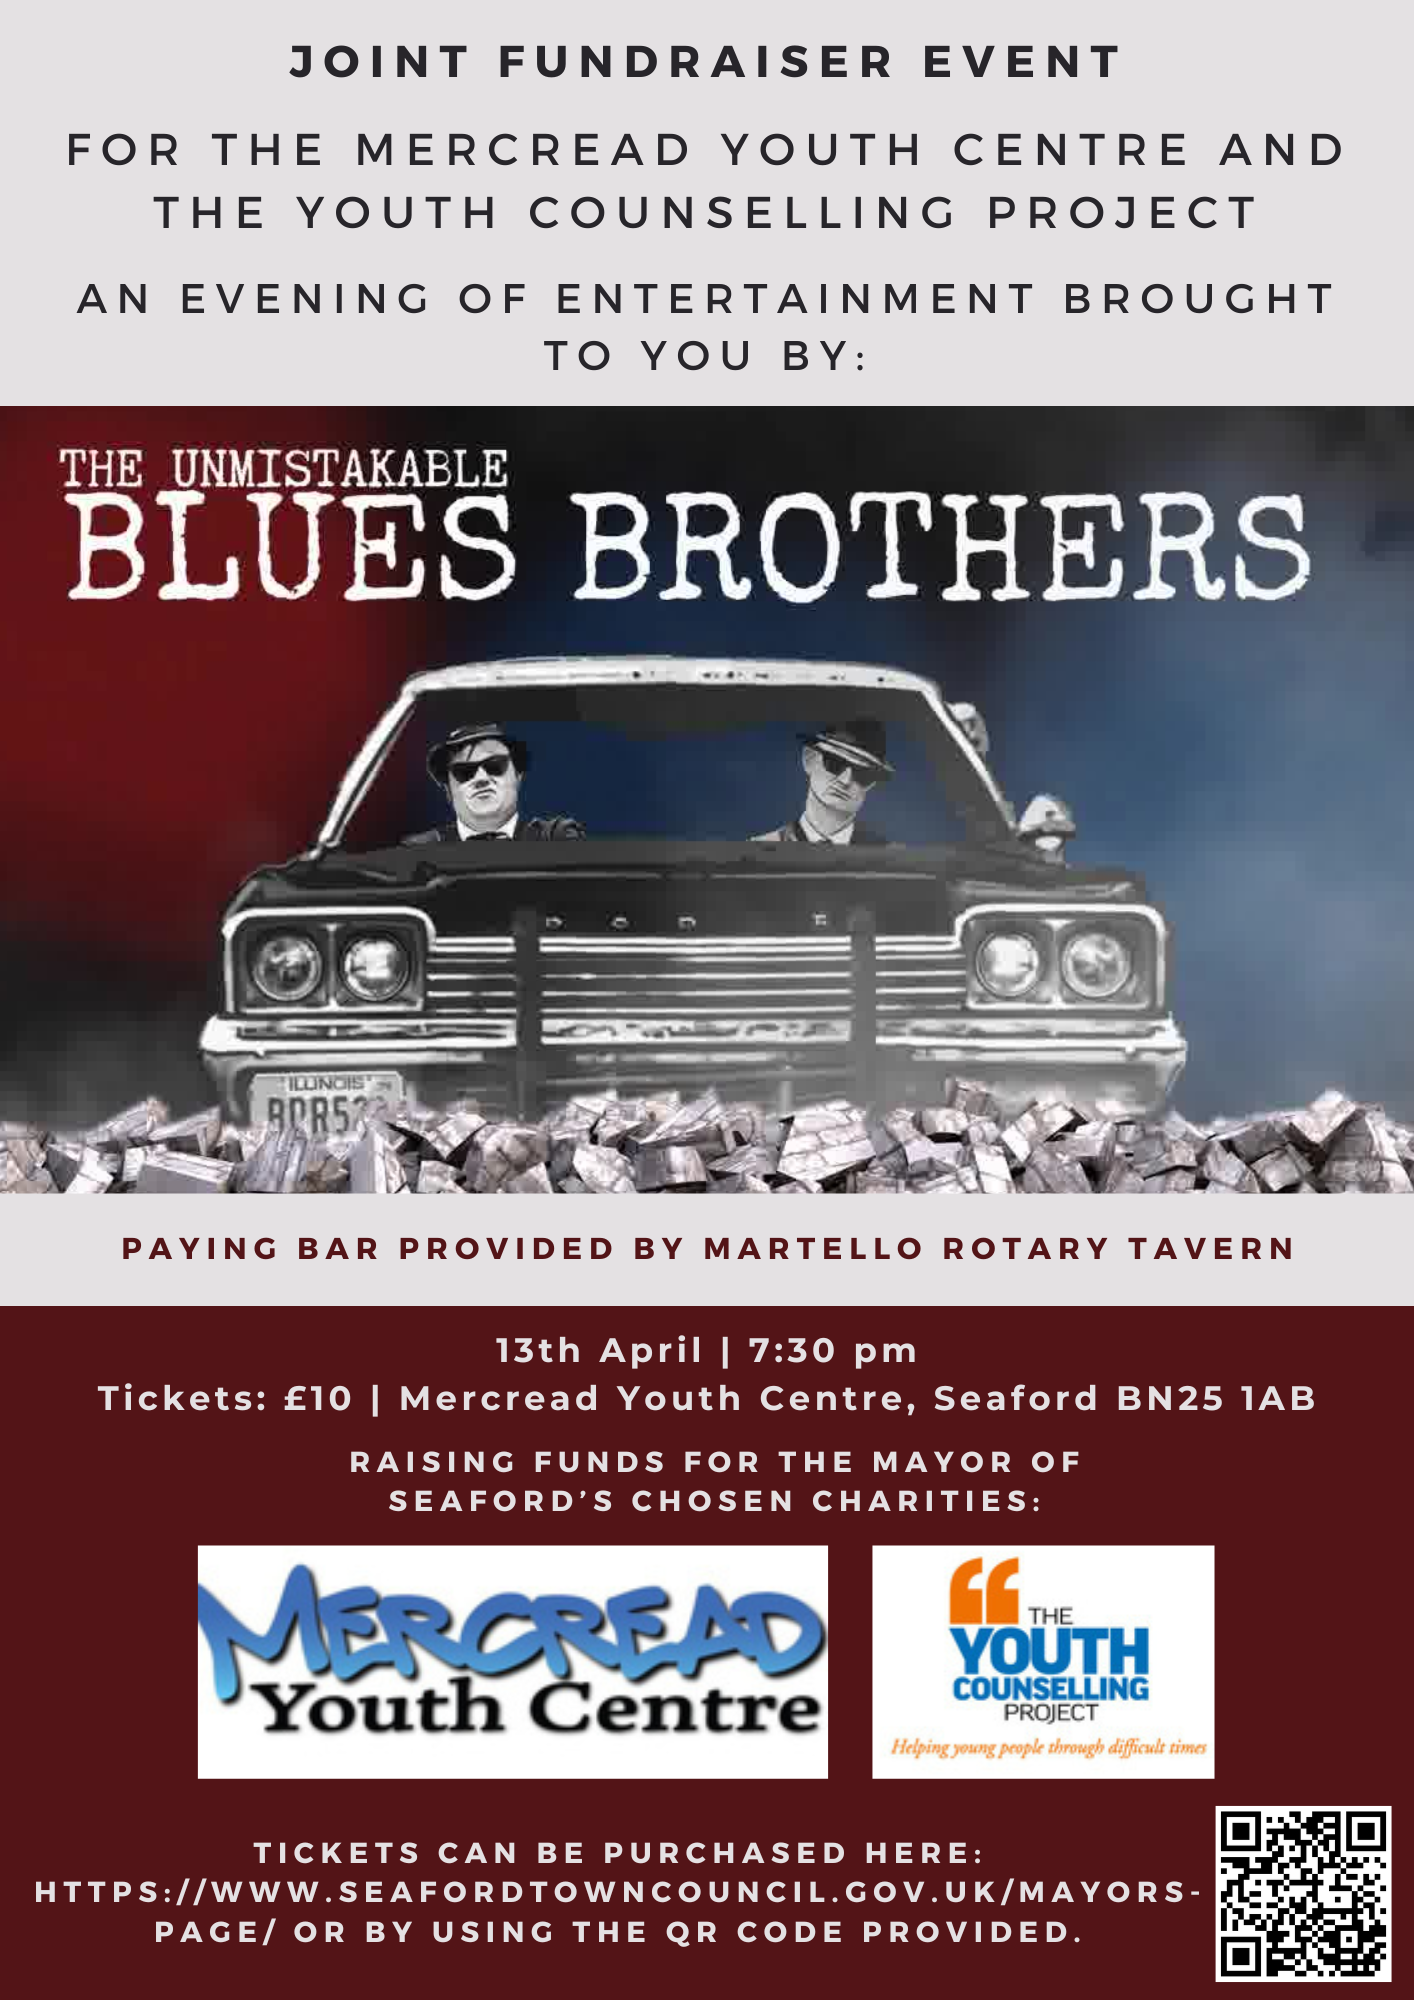 Poster saying "joint fundraiser event for the Mercread Youth Centre and The Youth Counselling Project. An evening of entertainment brough to you by The Unmistakable Blues Brothers. Paying bar provided by Martello Rotary Tavern. 13th April 7.30pm, tickets £10, The Mercread Youth Centre Seaford BN25 1AB. Tickets can be purchased from the Mayor's page of the Seaford Town Council website."